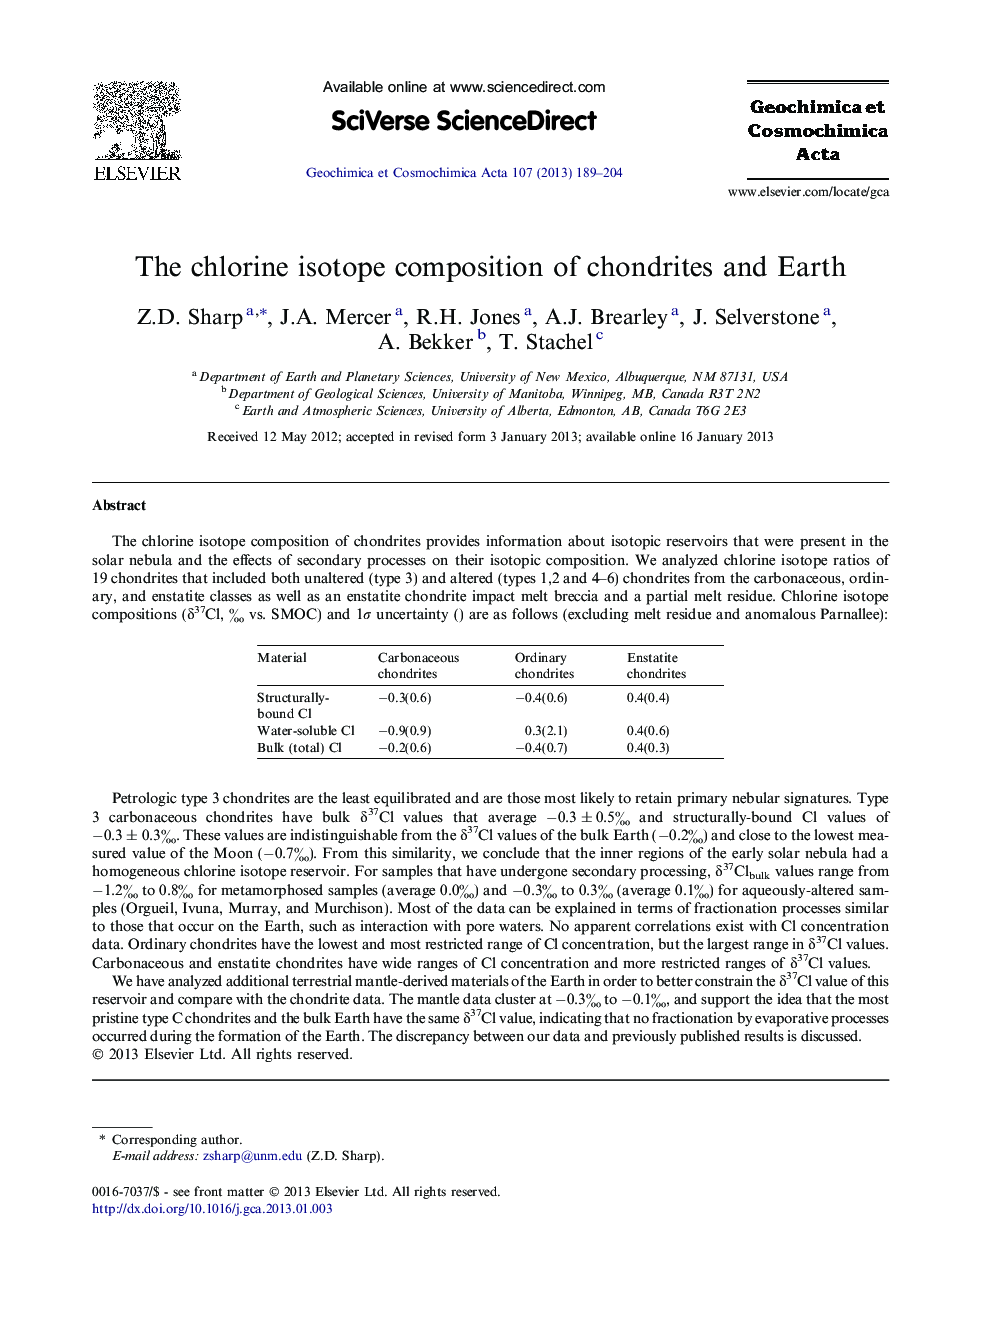 The chlorine isotope composition of chondrites and Earth